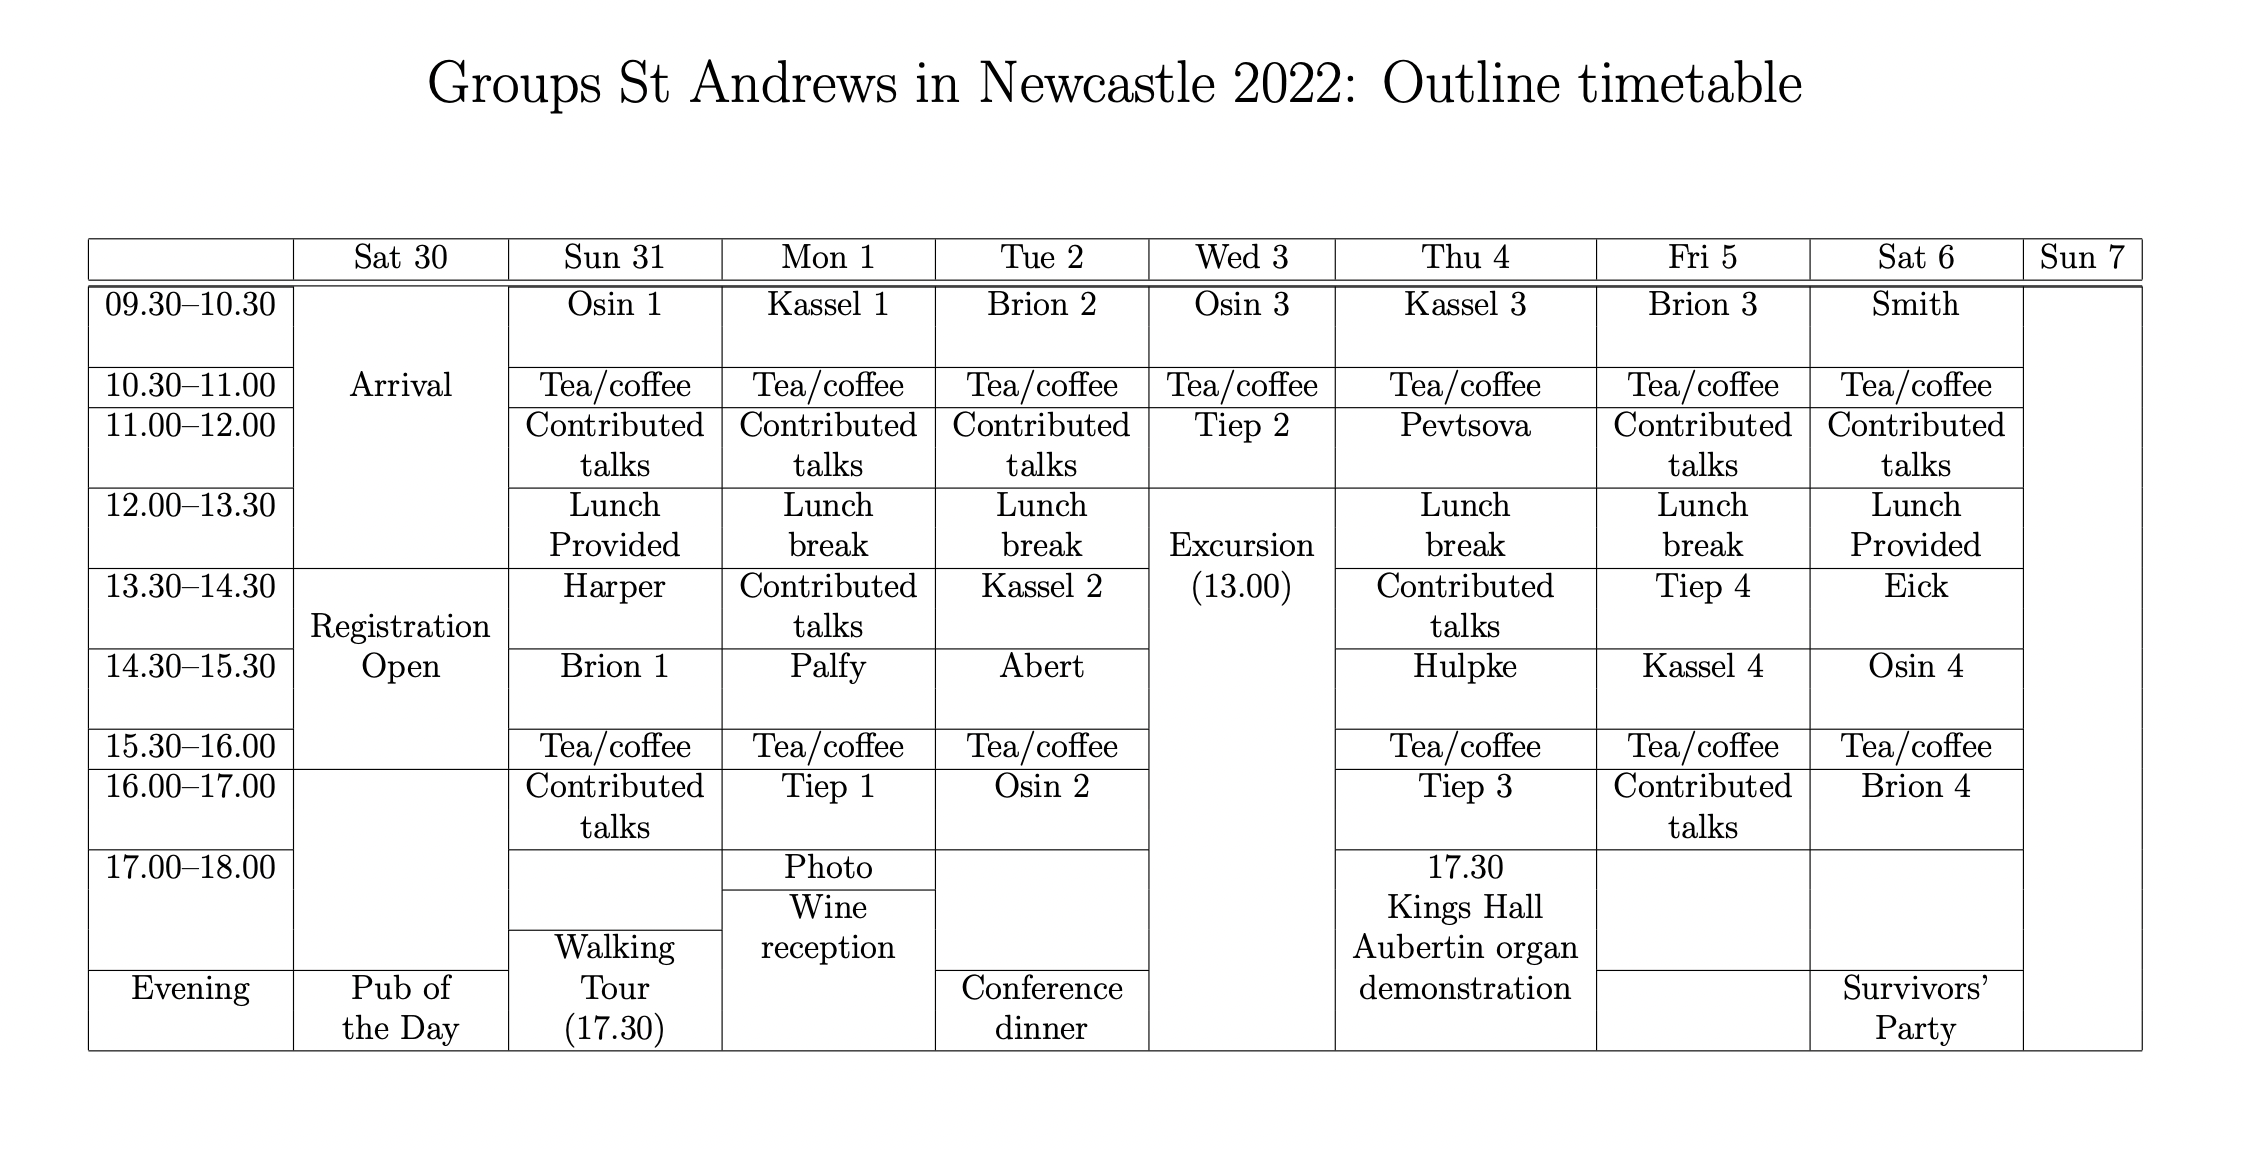 Outline timetable